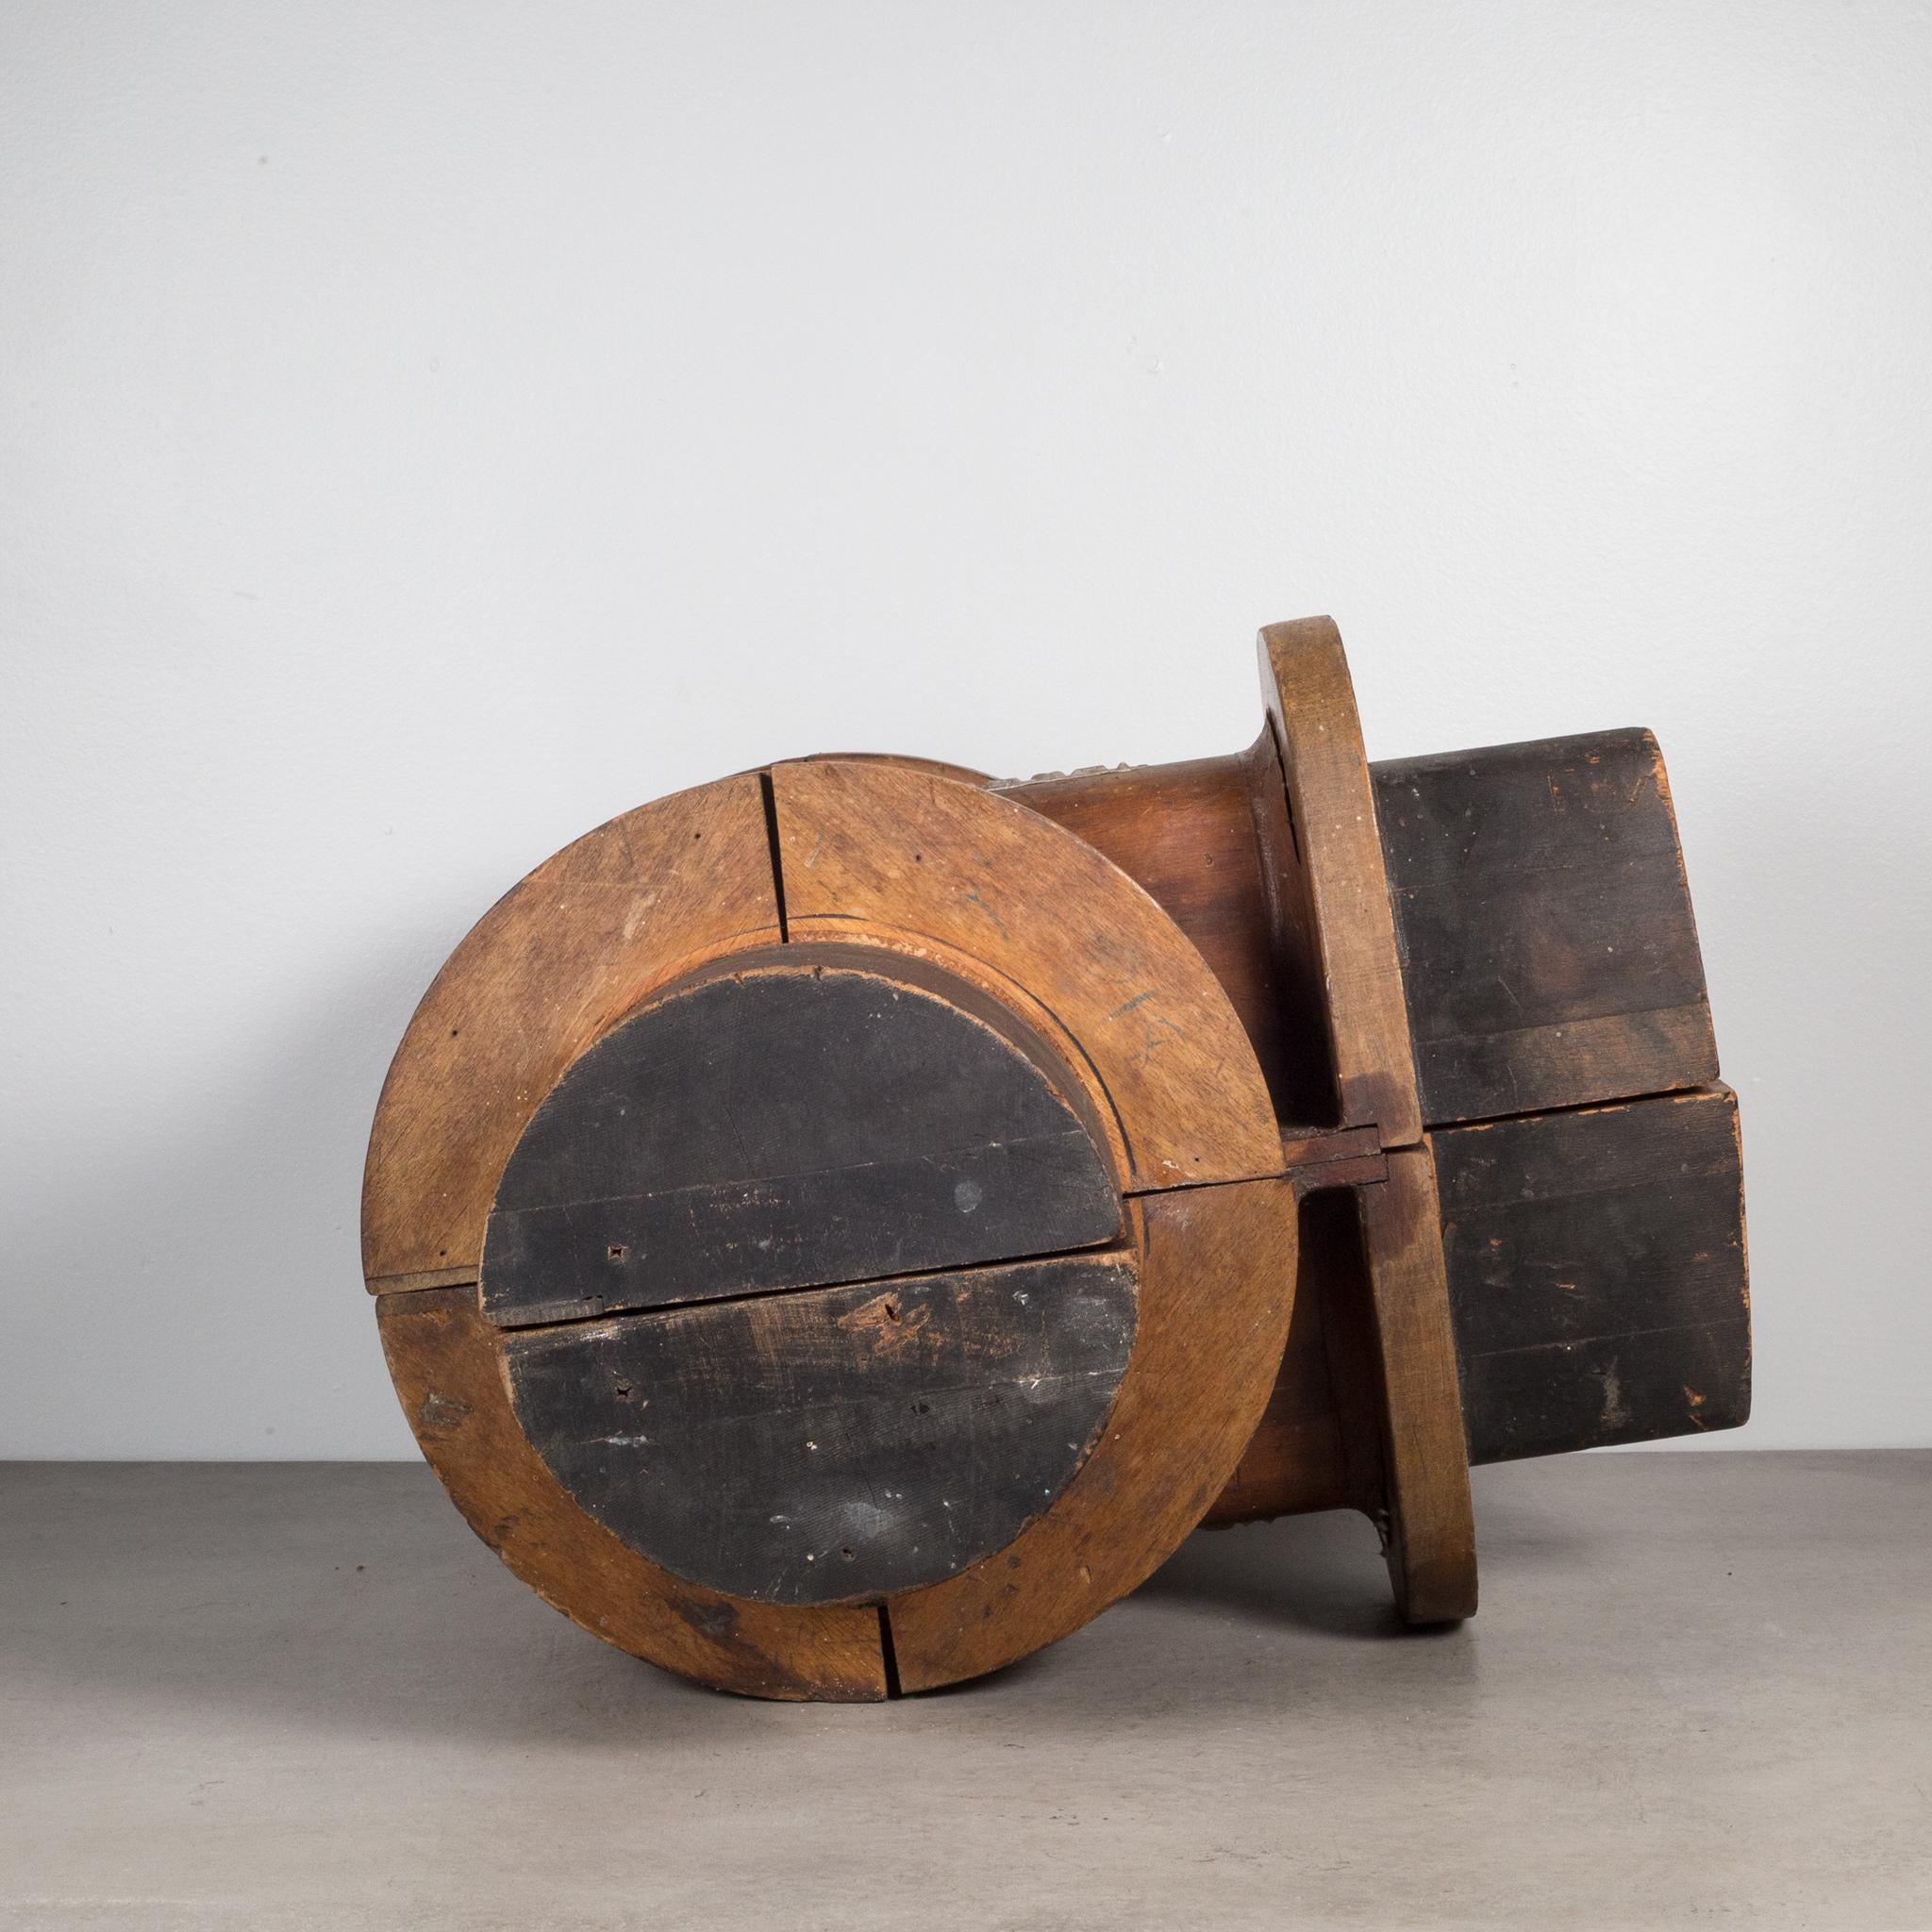 Industrial Large Early 20th C, Wooden Foundry Mold, c.1900